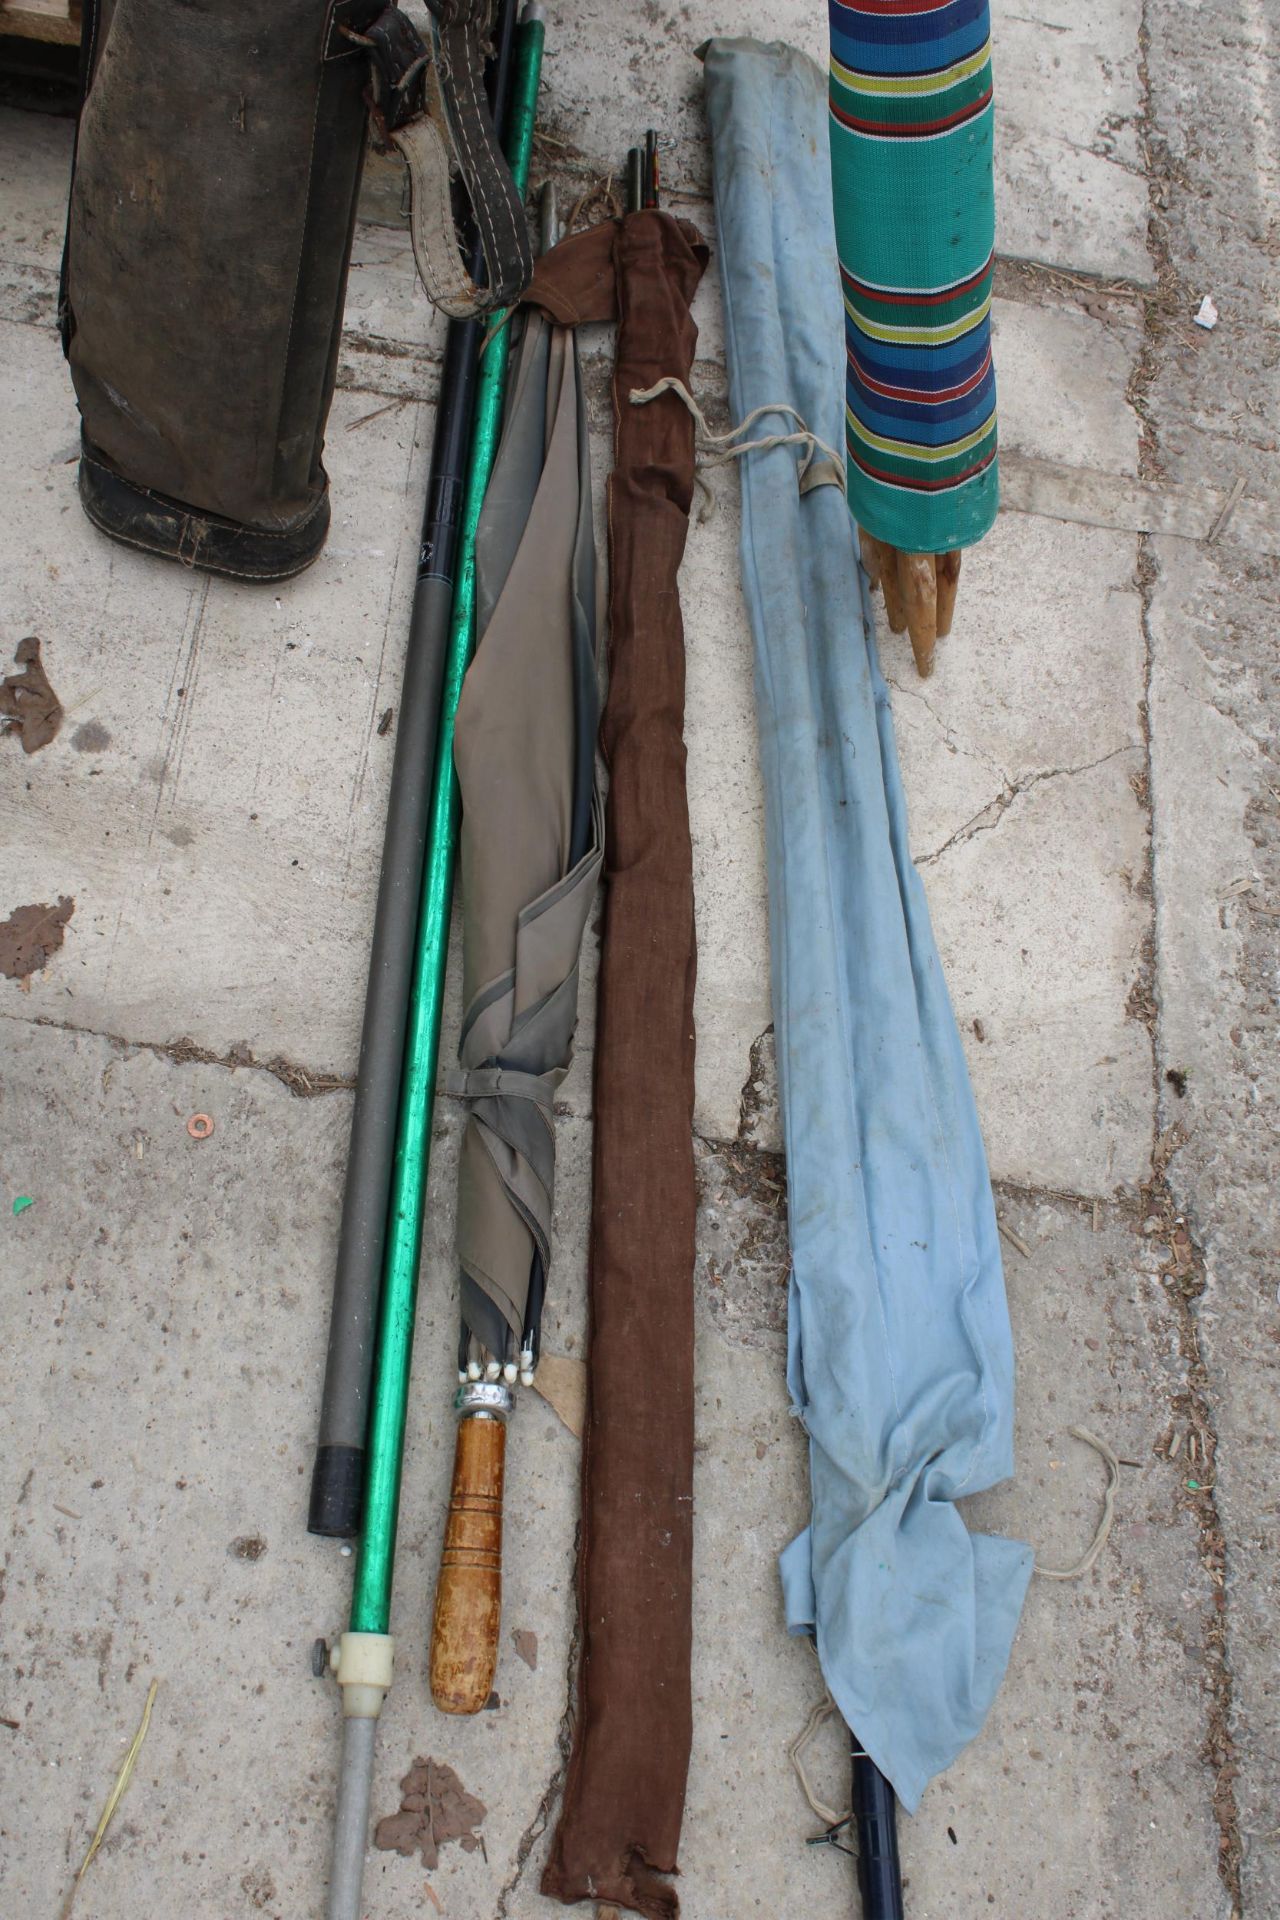 AN ASSORTMENT OF FISHING RODS AND A WIND BREAK - Image 4 of 4